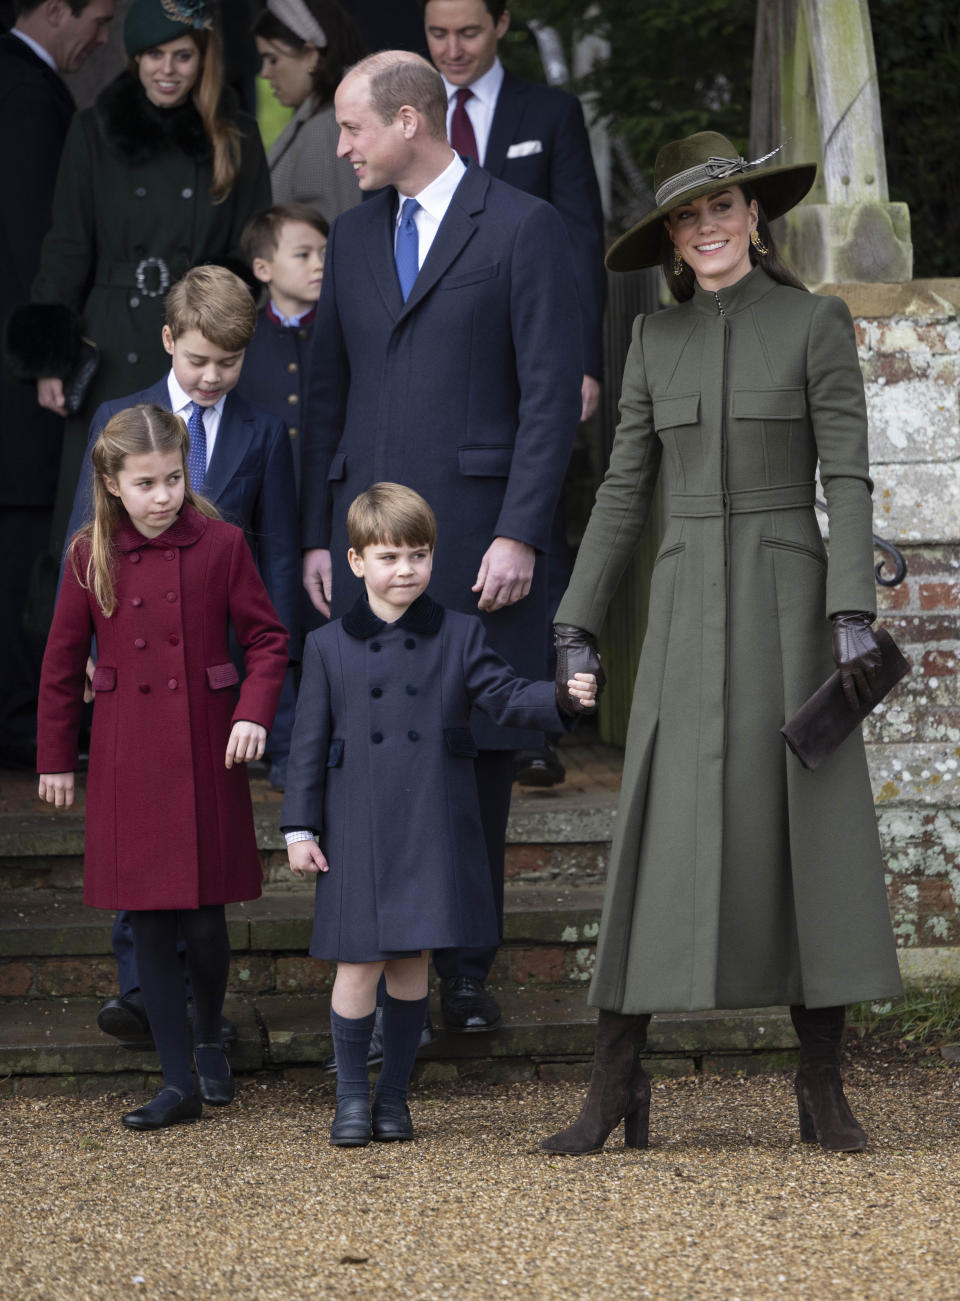 SANDRINGHAM, NORFOLK - DECEMBER 25: Prince William, Prince of Wales and Catherine, Princess of Wales with Prince George of Wales, Princess Charlotte of Wales and Prince Louis of Wales attend the Christmas Day service at St Mary Magdalene Church on December 25, 2022 in Sandringham, Norfolk. King Charles III ascended to the throne on September 8, 2022, with his coronation set for May 6, 2023. (Photo by UK Press Pool/UK Press via Getty Images)